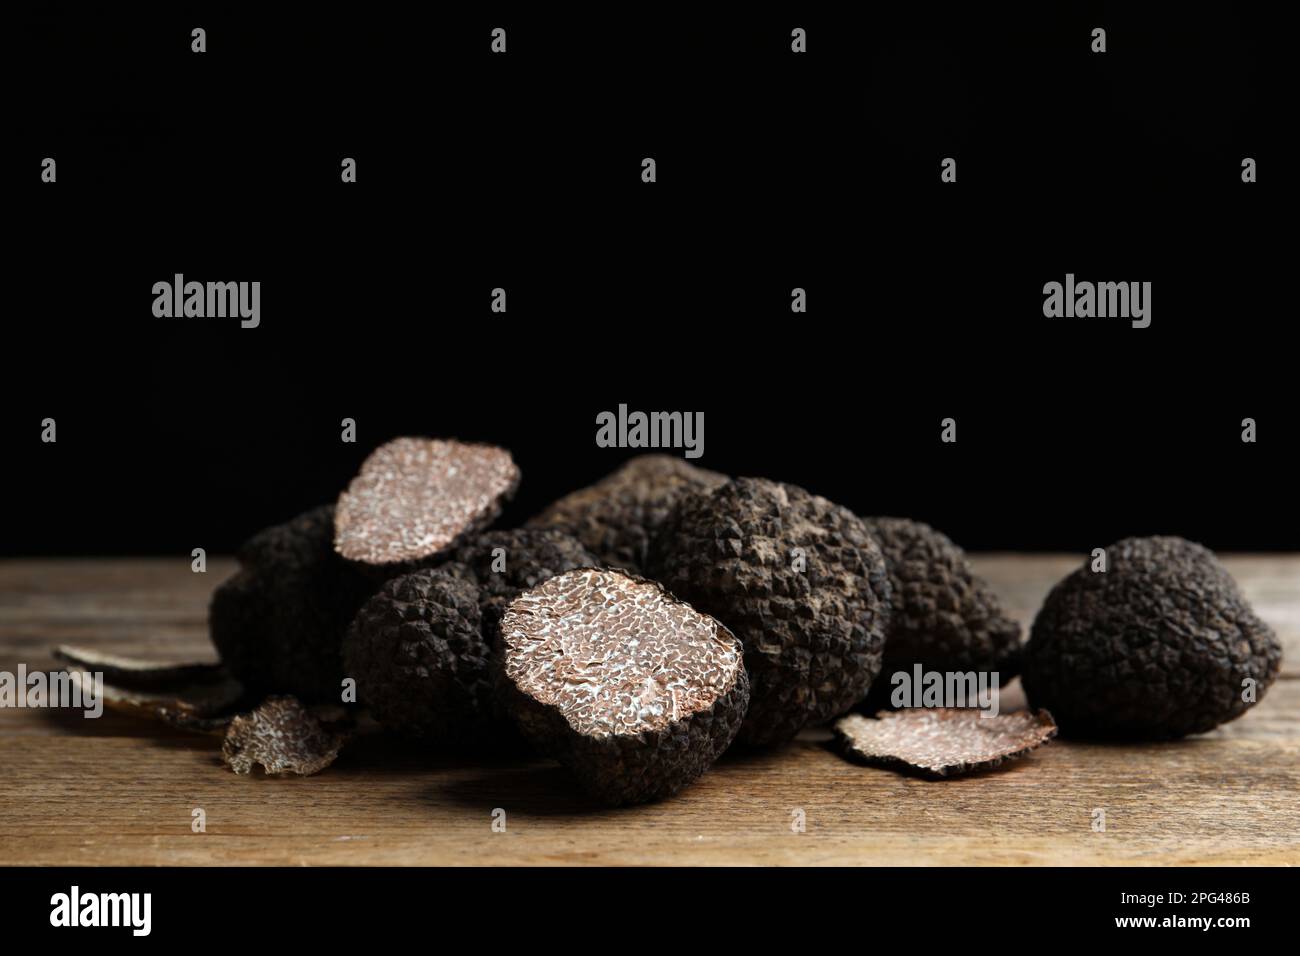 Whole and cut truffles on wooden table against black background Stock Photo